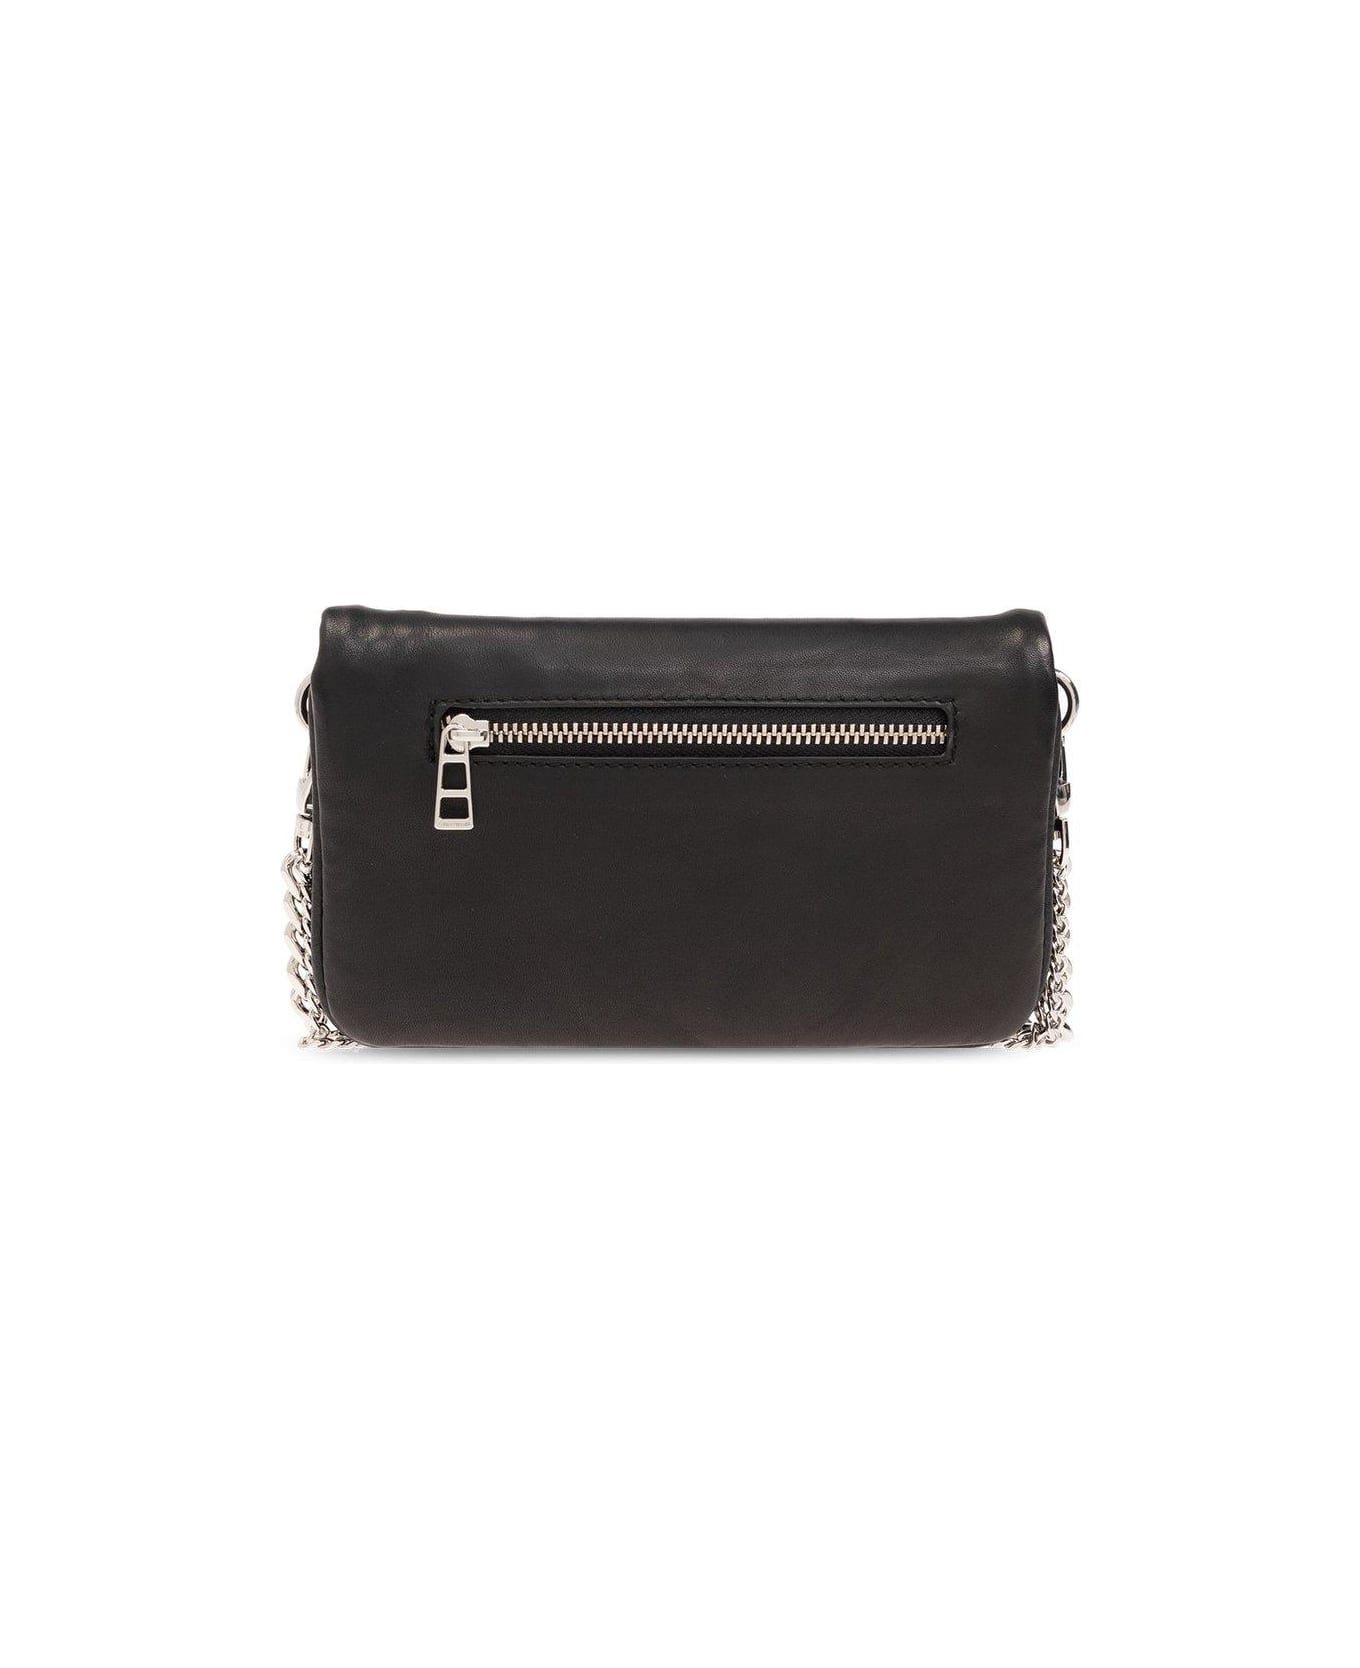 Zadig & Voltaire Rock Nano Lucky Charms Clutch Bag - Black ショルダーバッグ